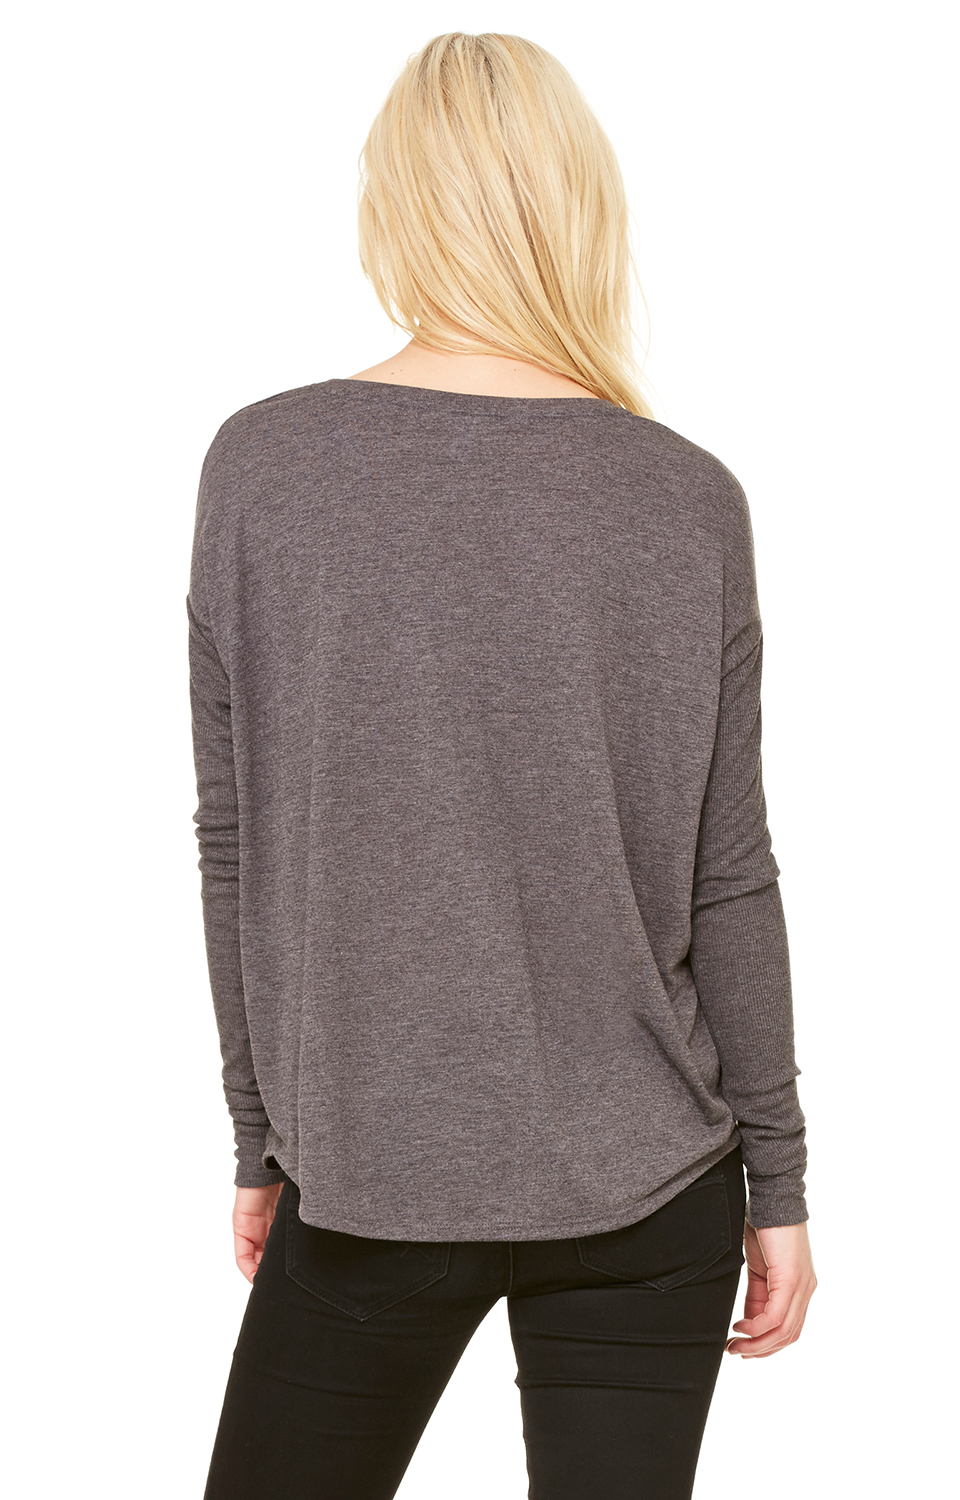 Bella + Canvas 8852 Ladies' Flowy Long-Sleeve T-Shirt with ...